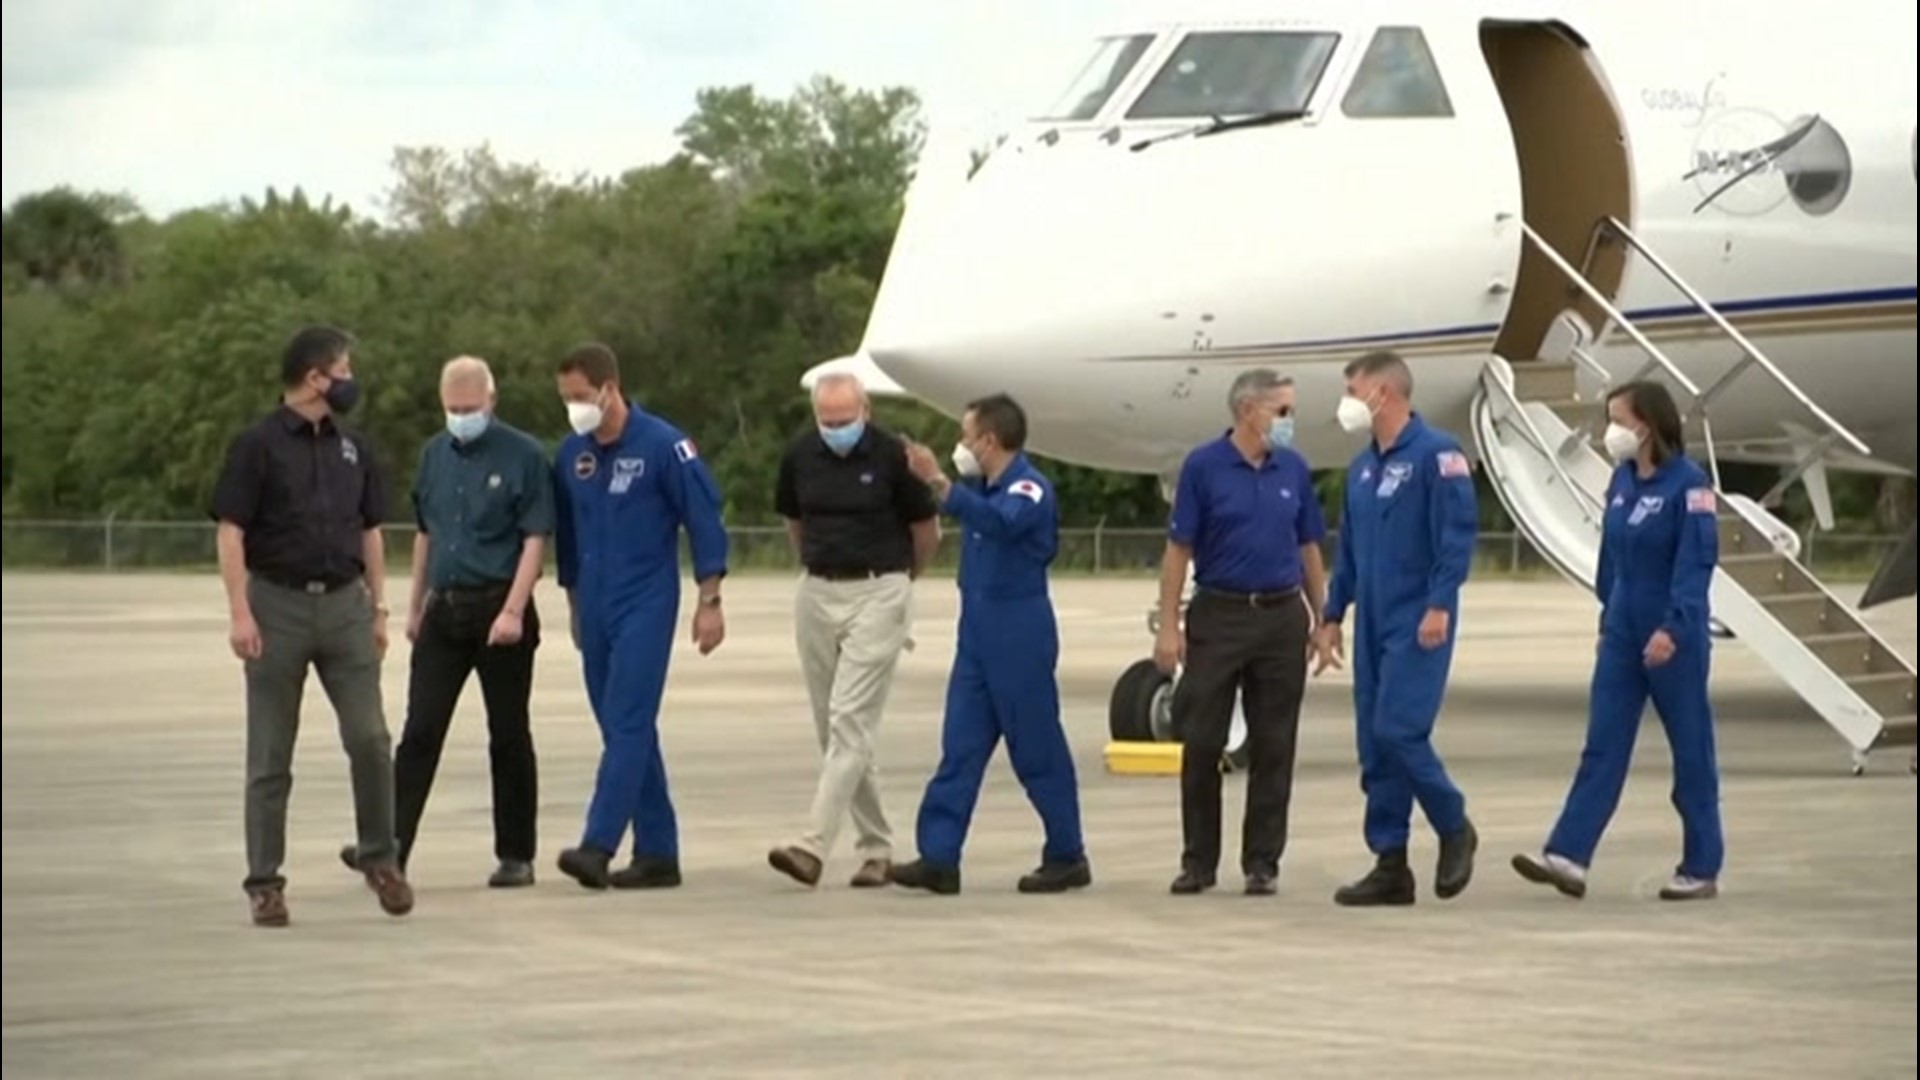 A group of four astronauts - two from the U.S., one from France and one from Japan - arrived at Cape Canaveral on April 16, saying it's 'a new era for manned flights.'